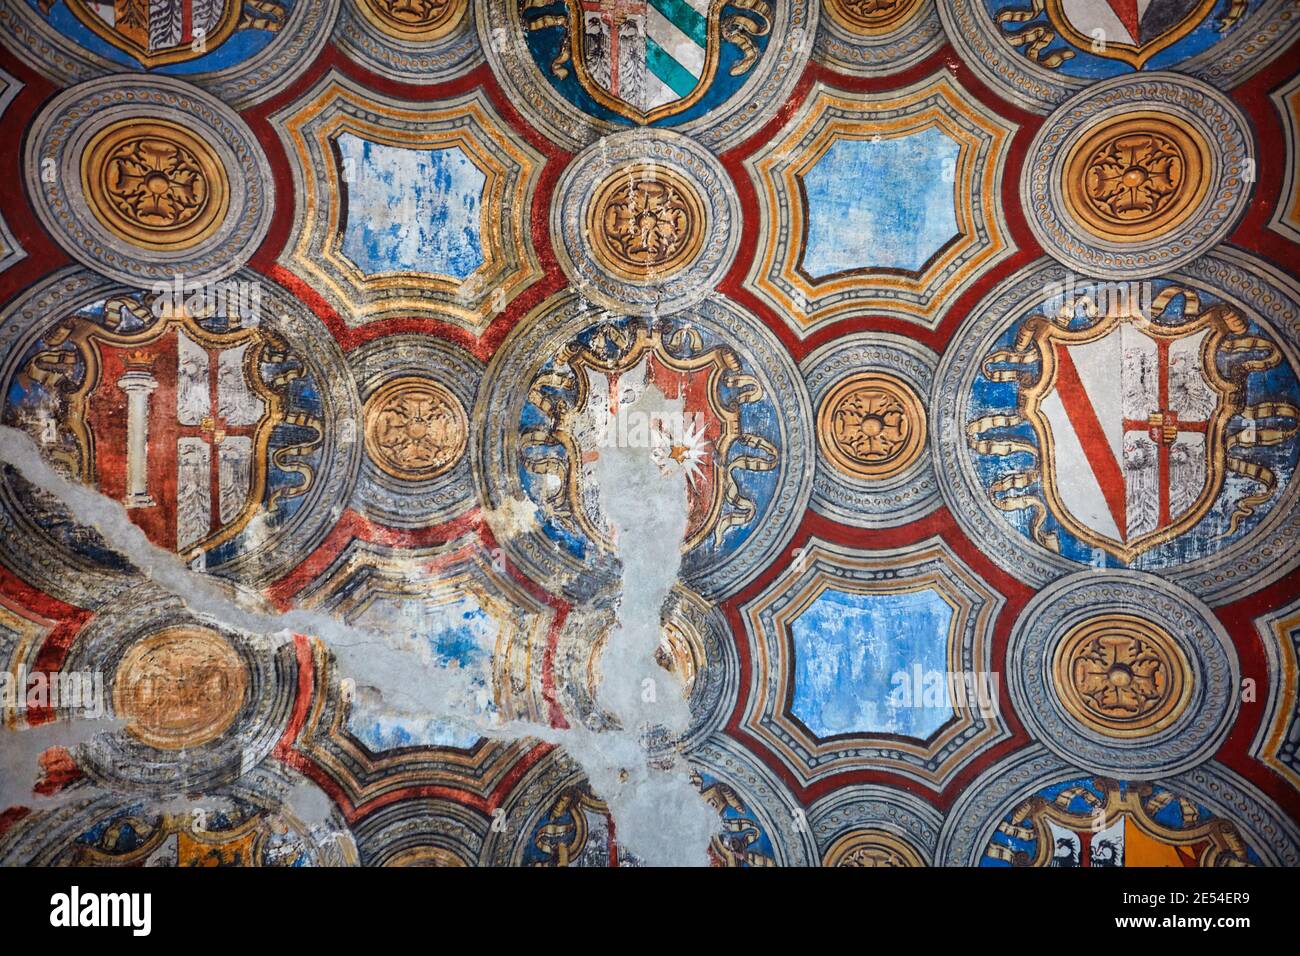 Coats of arms, emblems of the royal families painted at the entrance of the Rocca Sanvitale Castle, a fortress in Fontanellato, Parma, Italy. Stock Photo